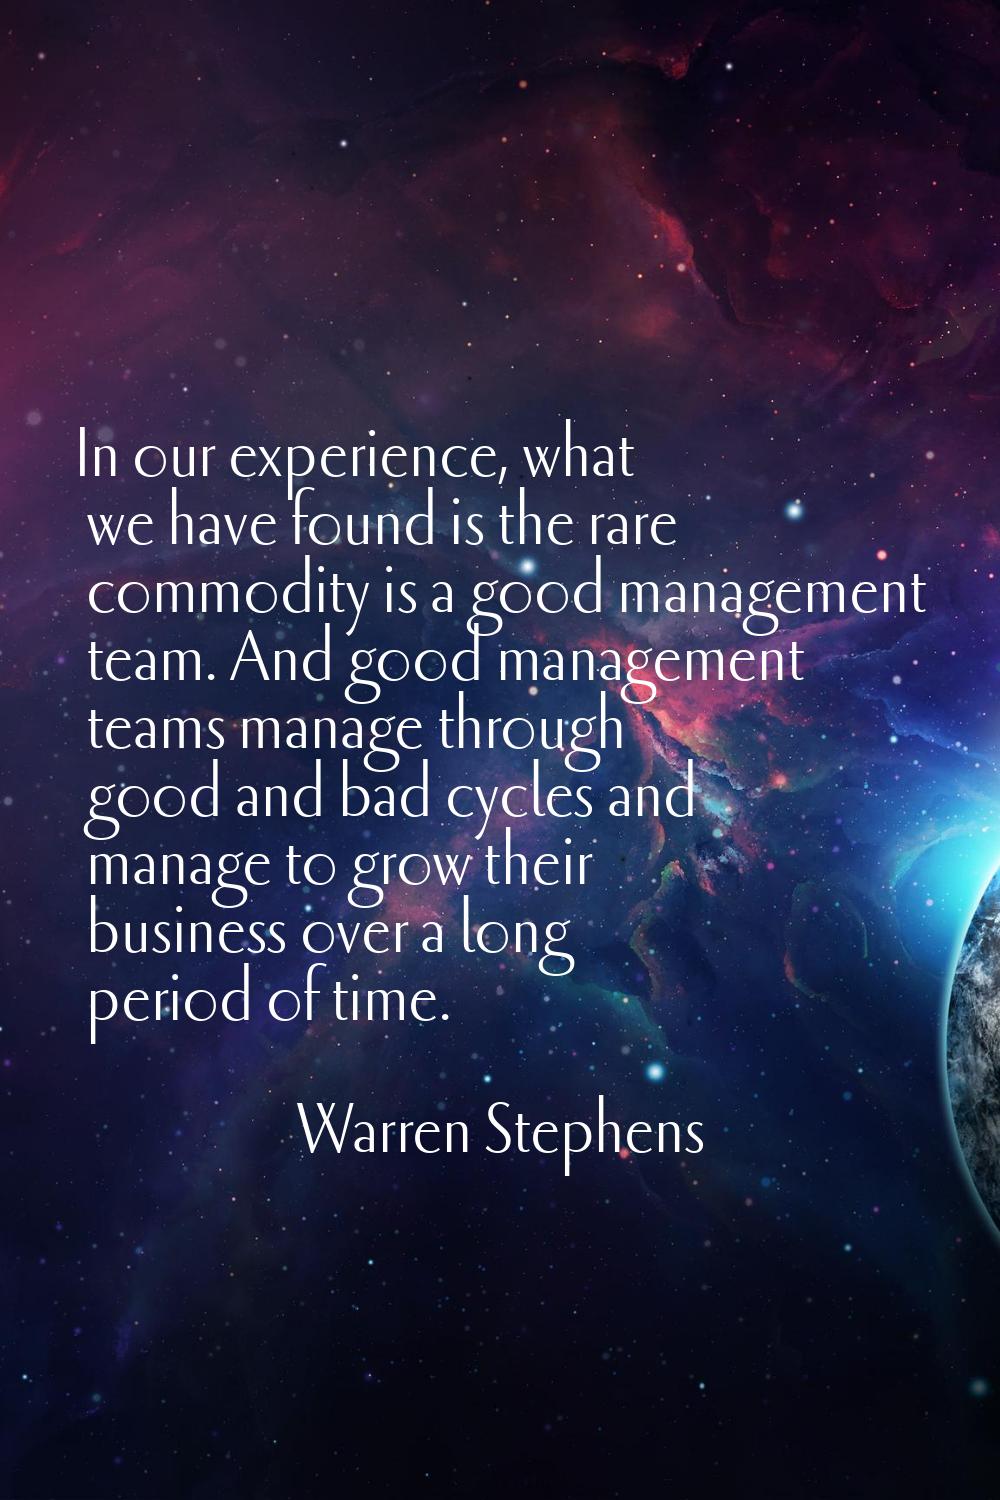 In our experience, what we have found is the rare commodity is a good management team. And good man